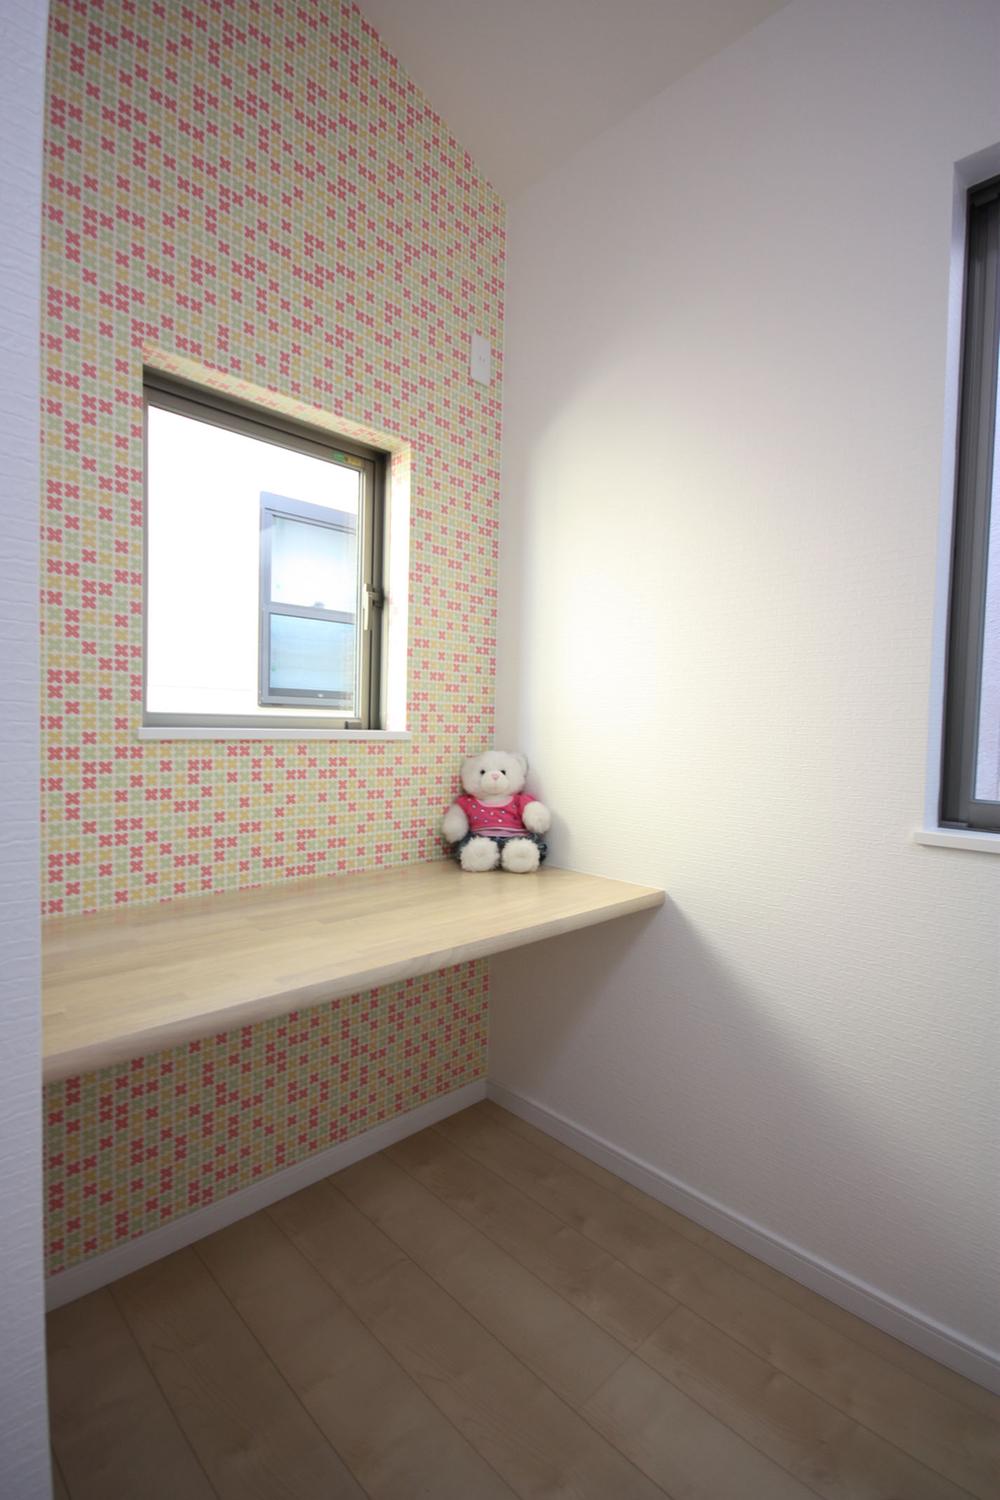 Building plan example (introspection photo). The children's room of accent, Such a lovely wallpaper is also recommended. Effortlessly move No need for desk. 